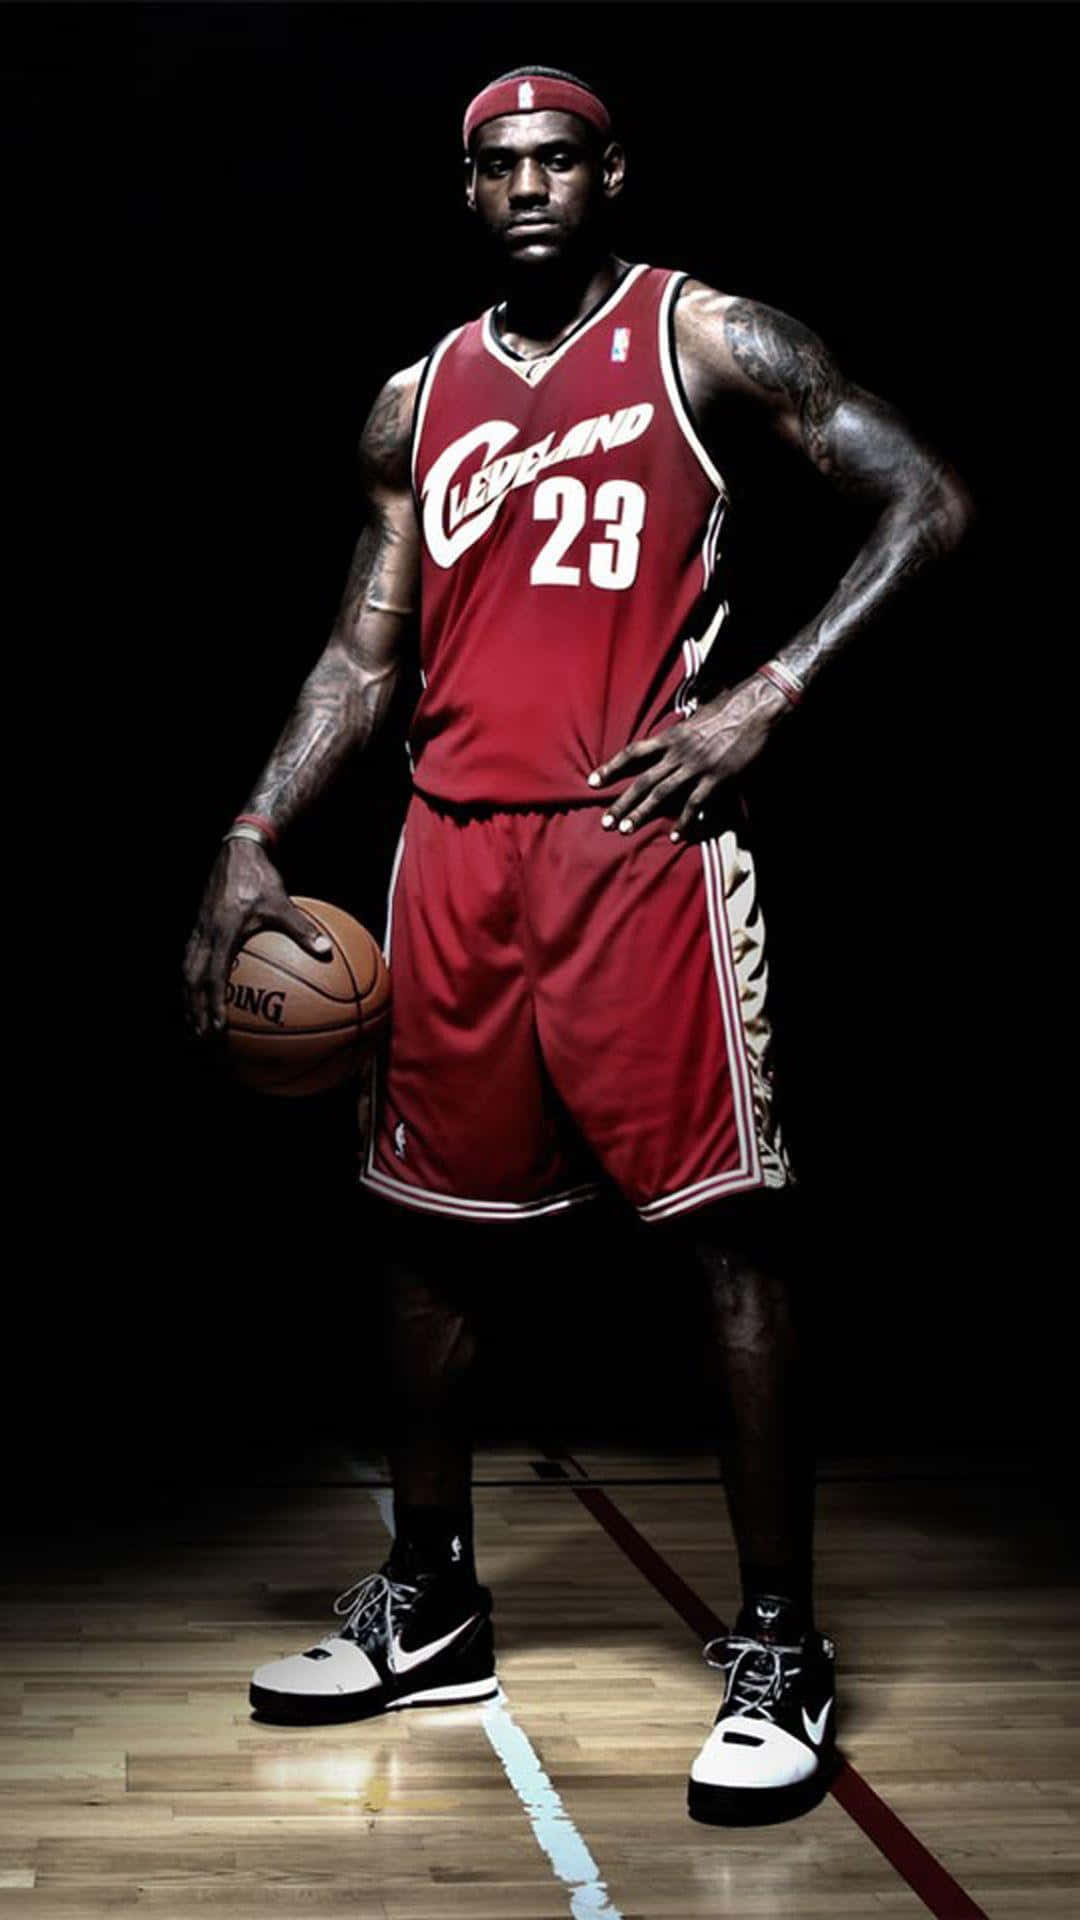 Get the perfect phone for basketball season with the LeBron James Edition iPhone Wallpaper